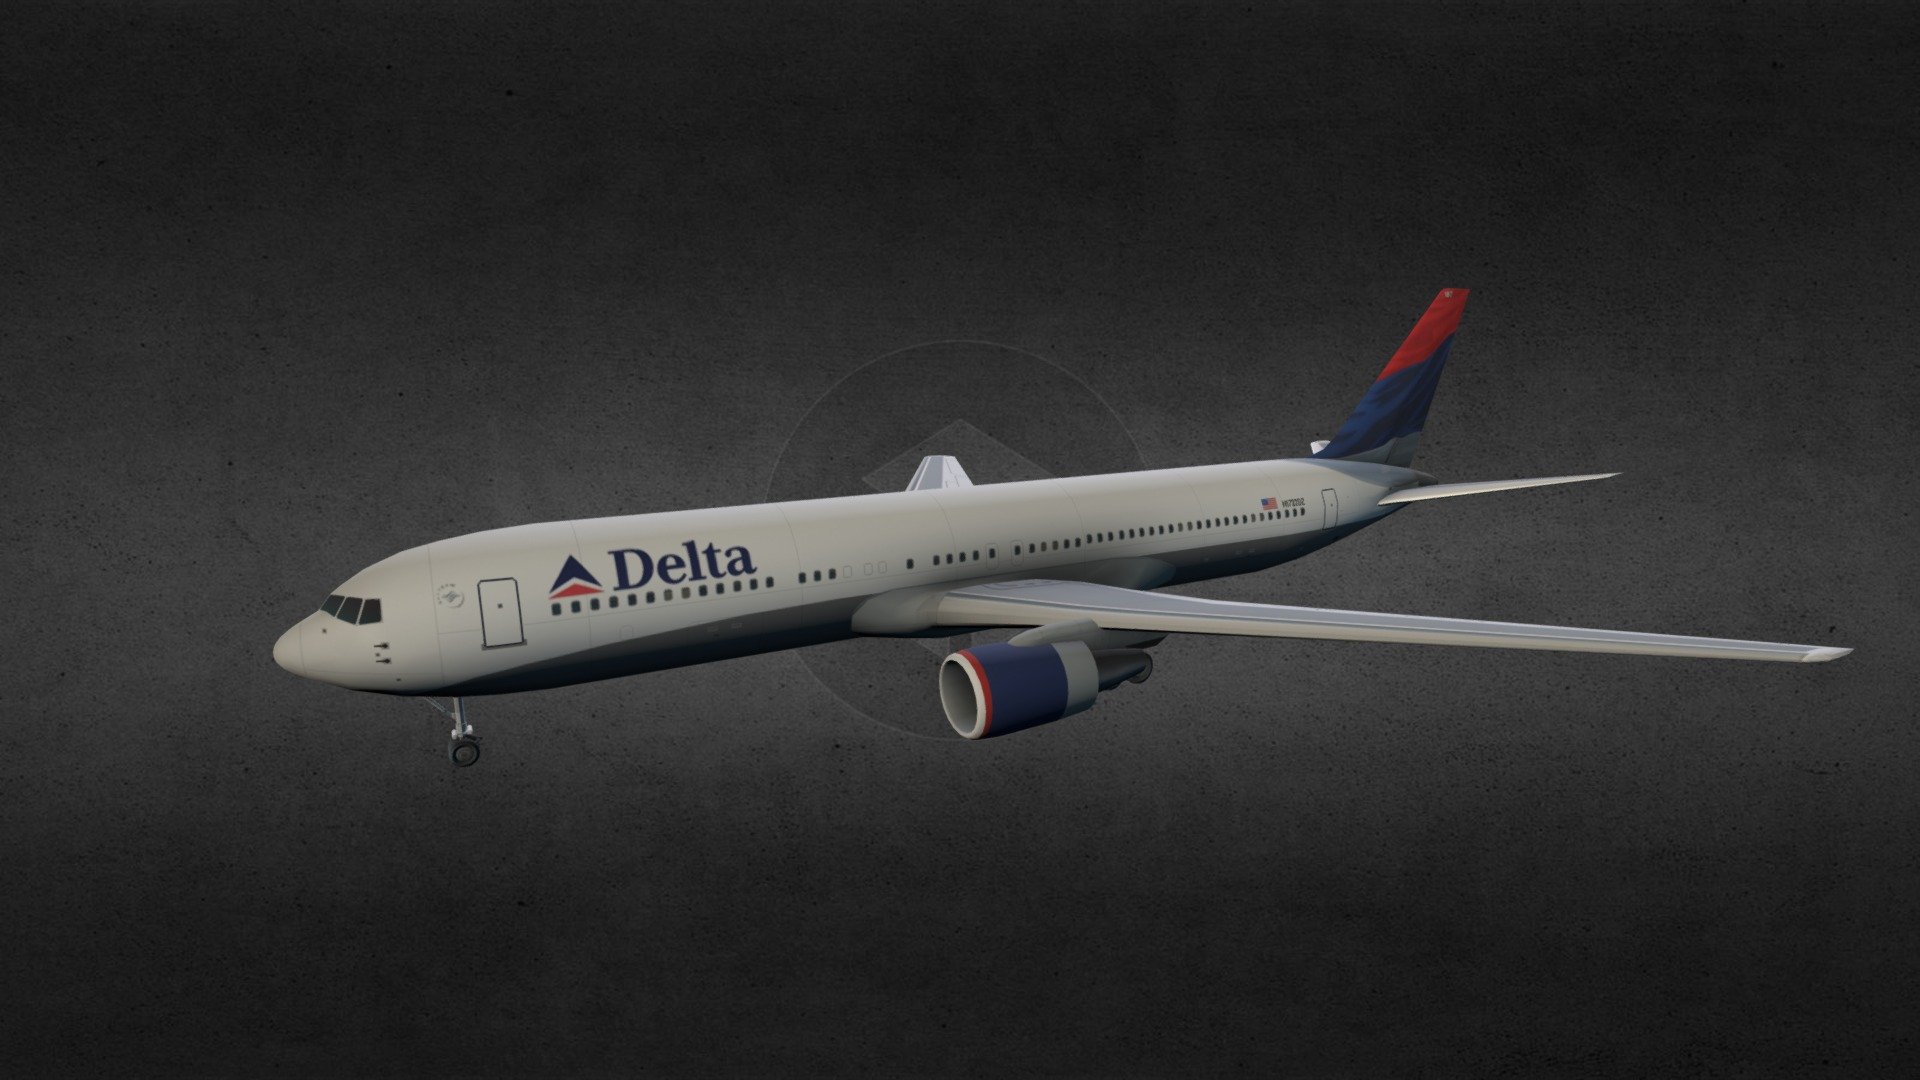 This digital model is based on the 767-300 aircraft with a &ldquo;Delta Airlines